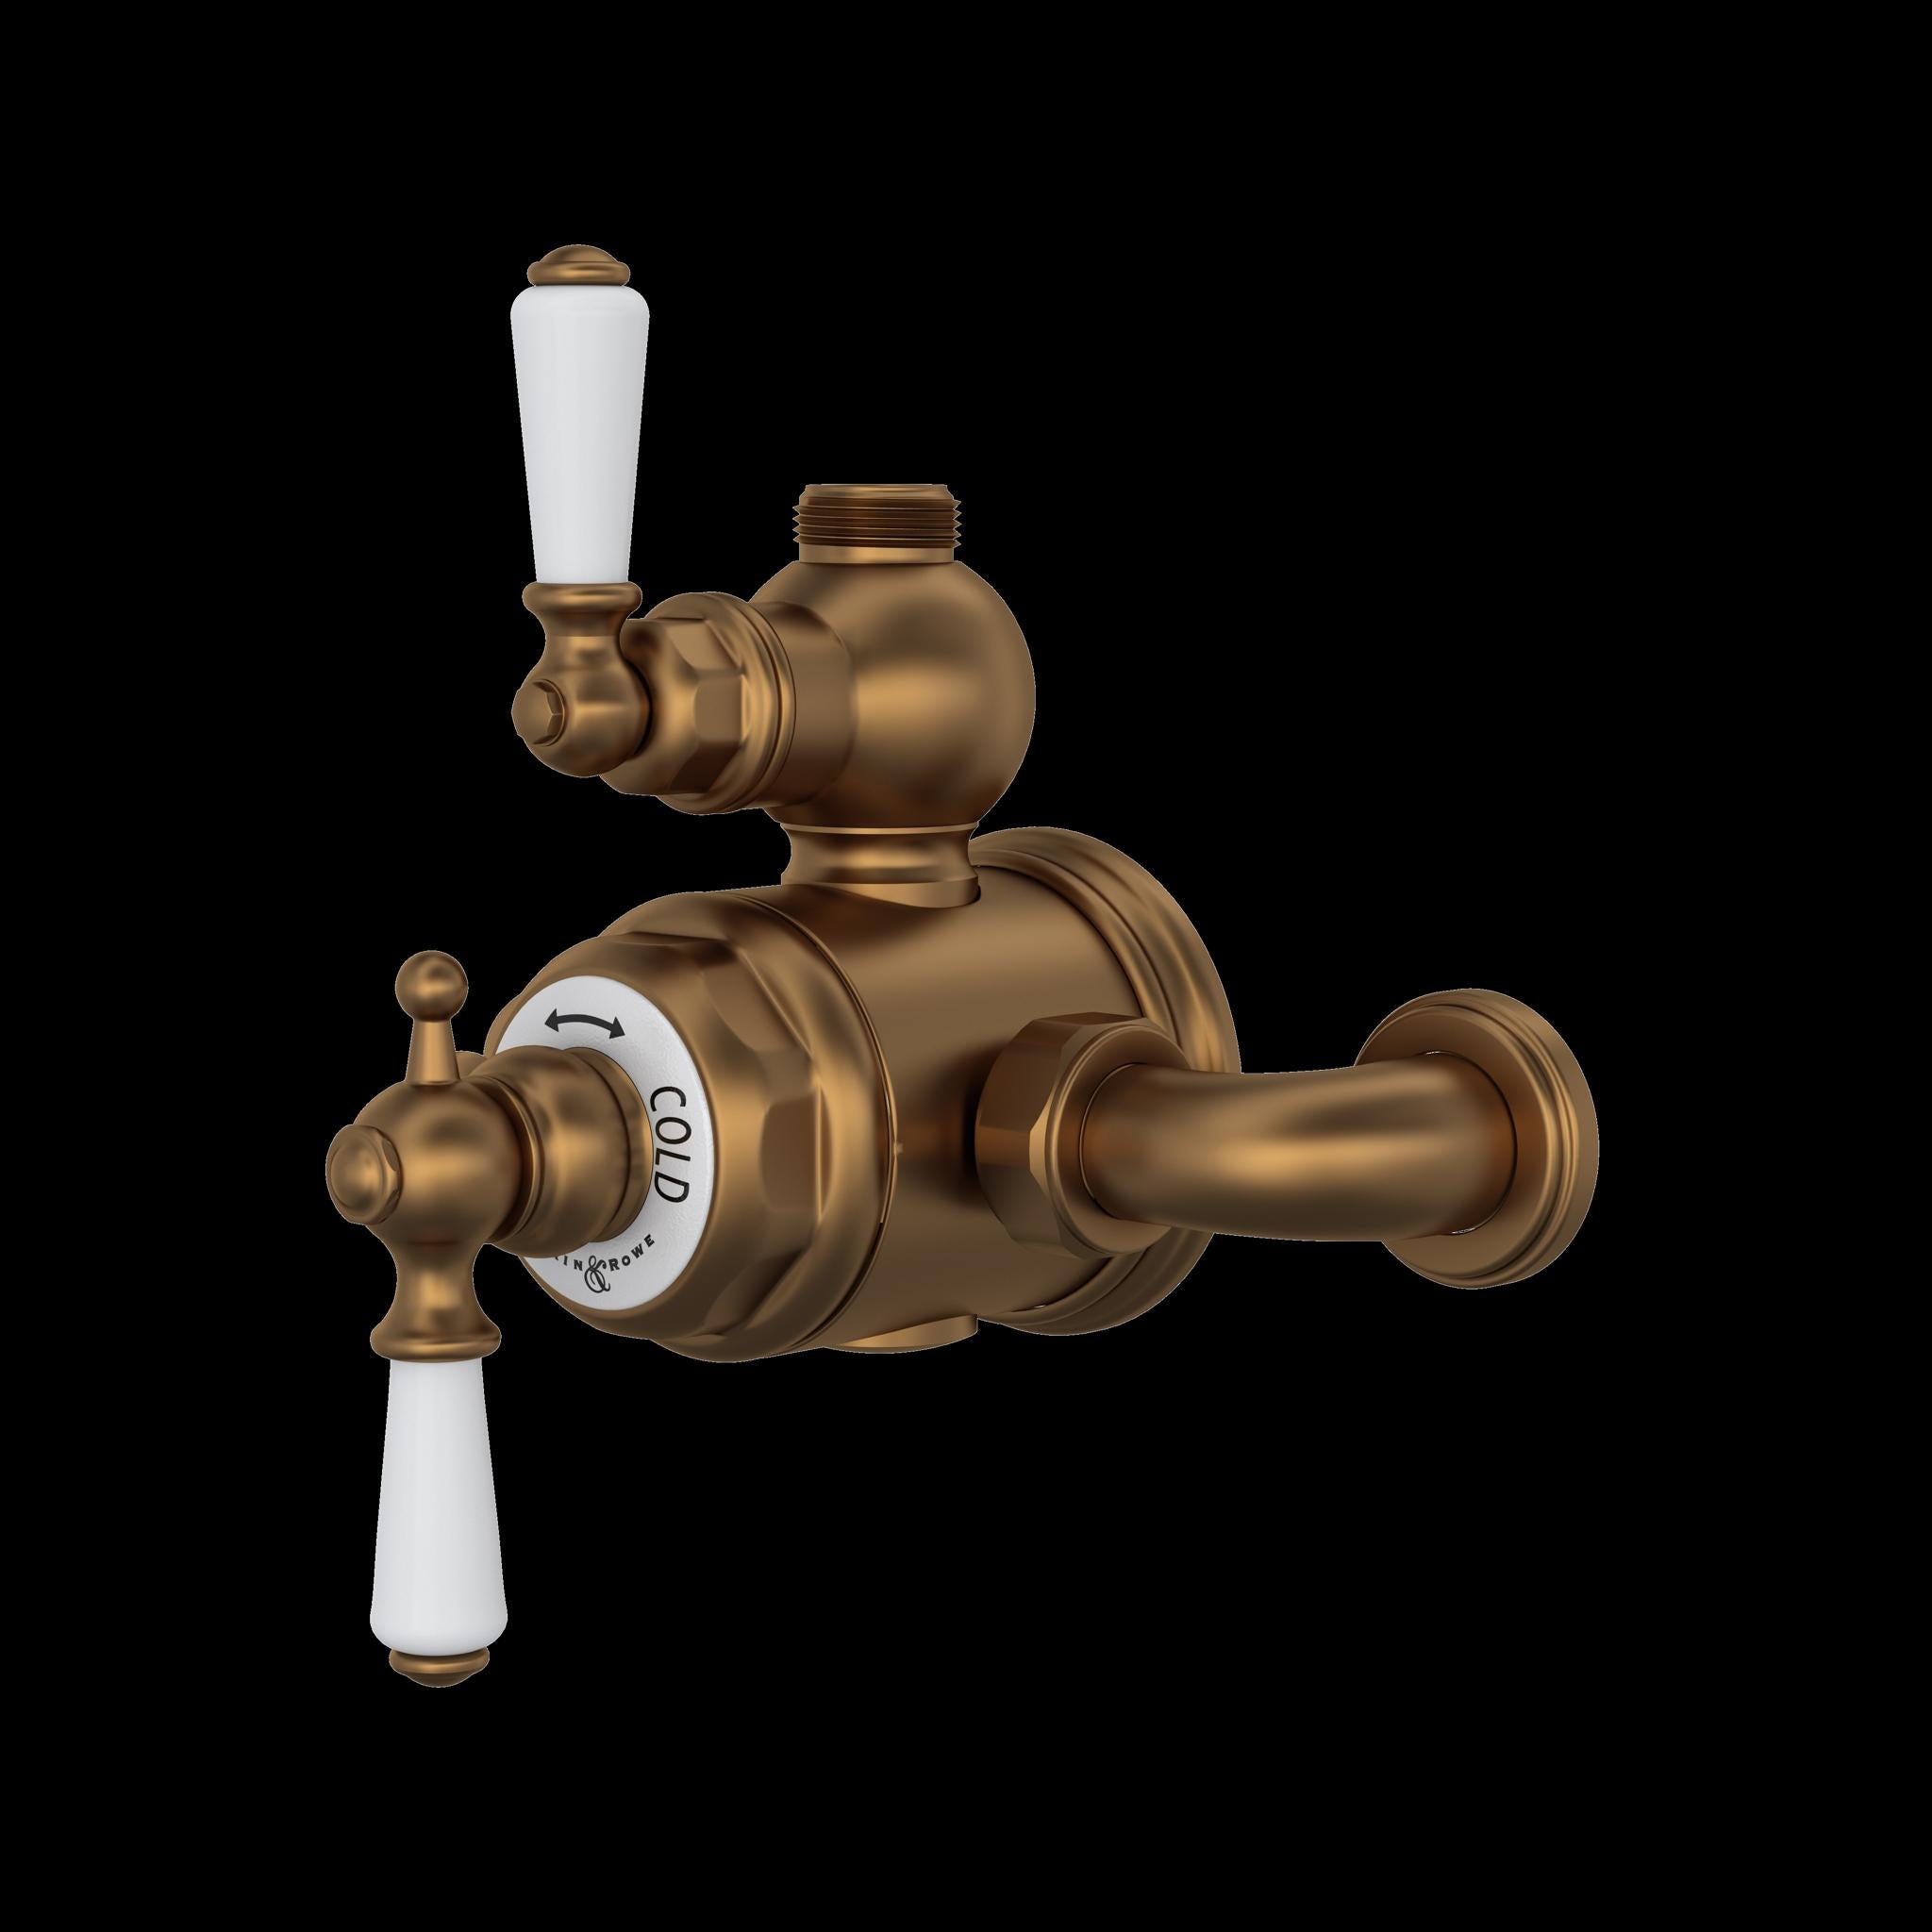 Perrin & Rowe U.5550 Edwardian 3/4" Exposed Therm Valve With Volume And Temperature Control